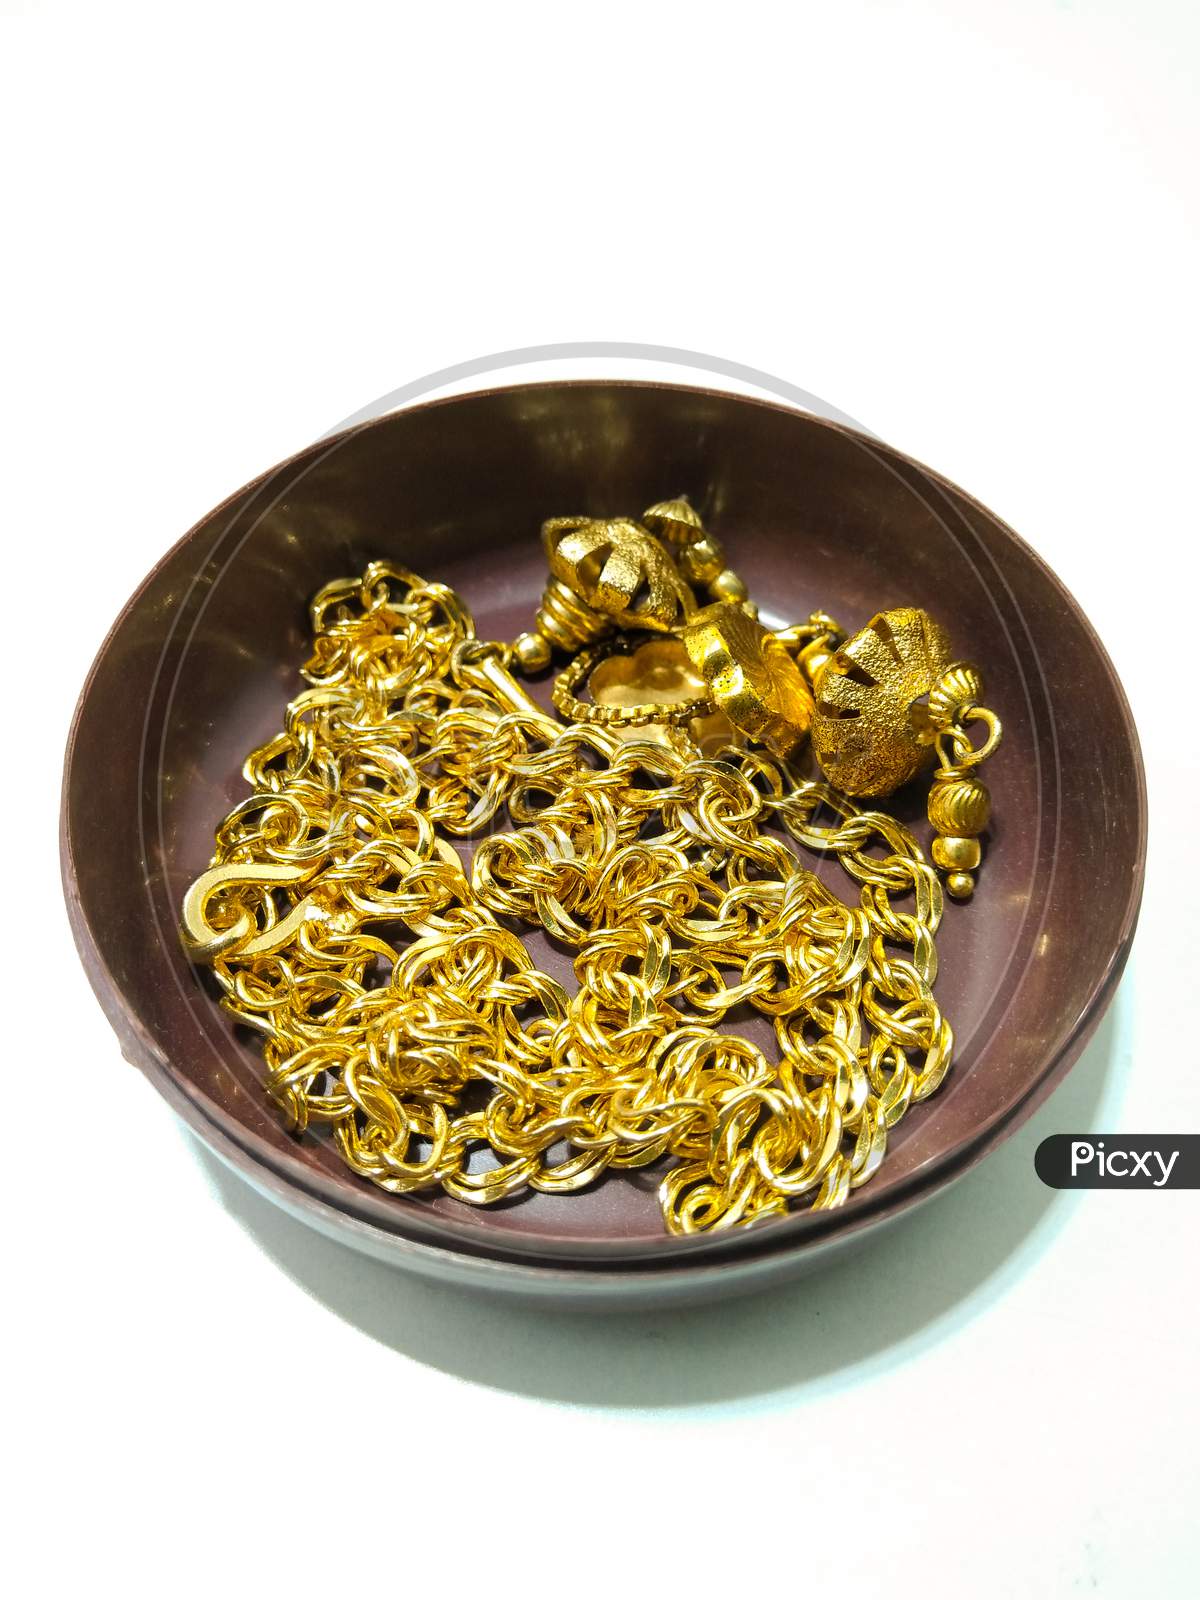 Gold Ornaments In an Bowl  Over an isolated White Background